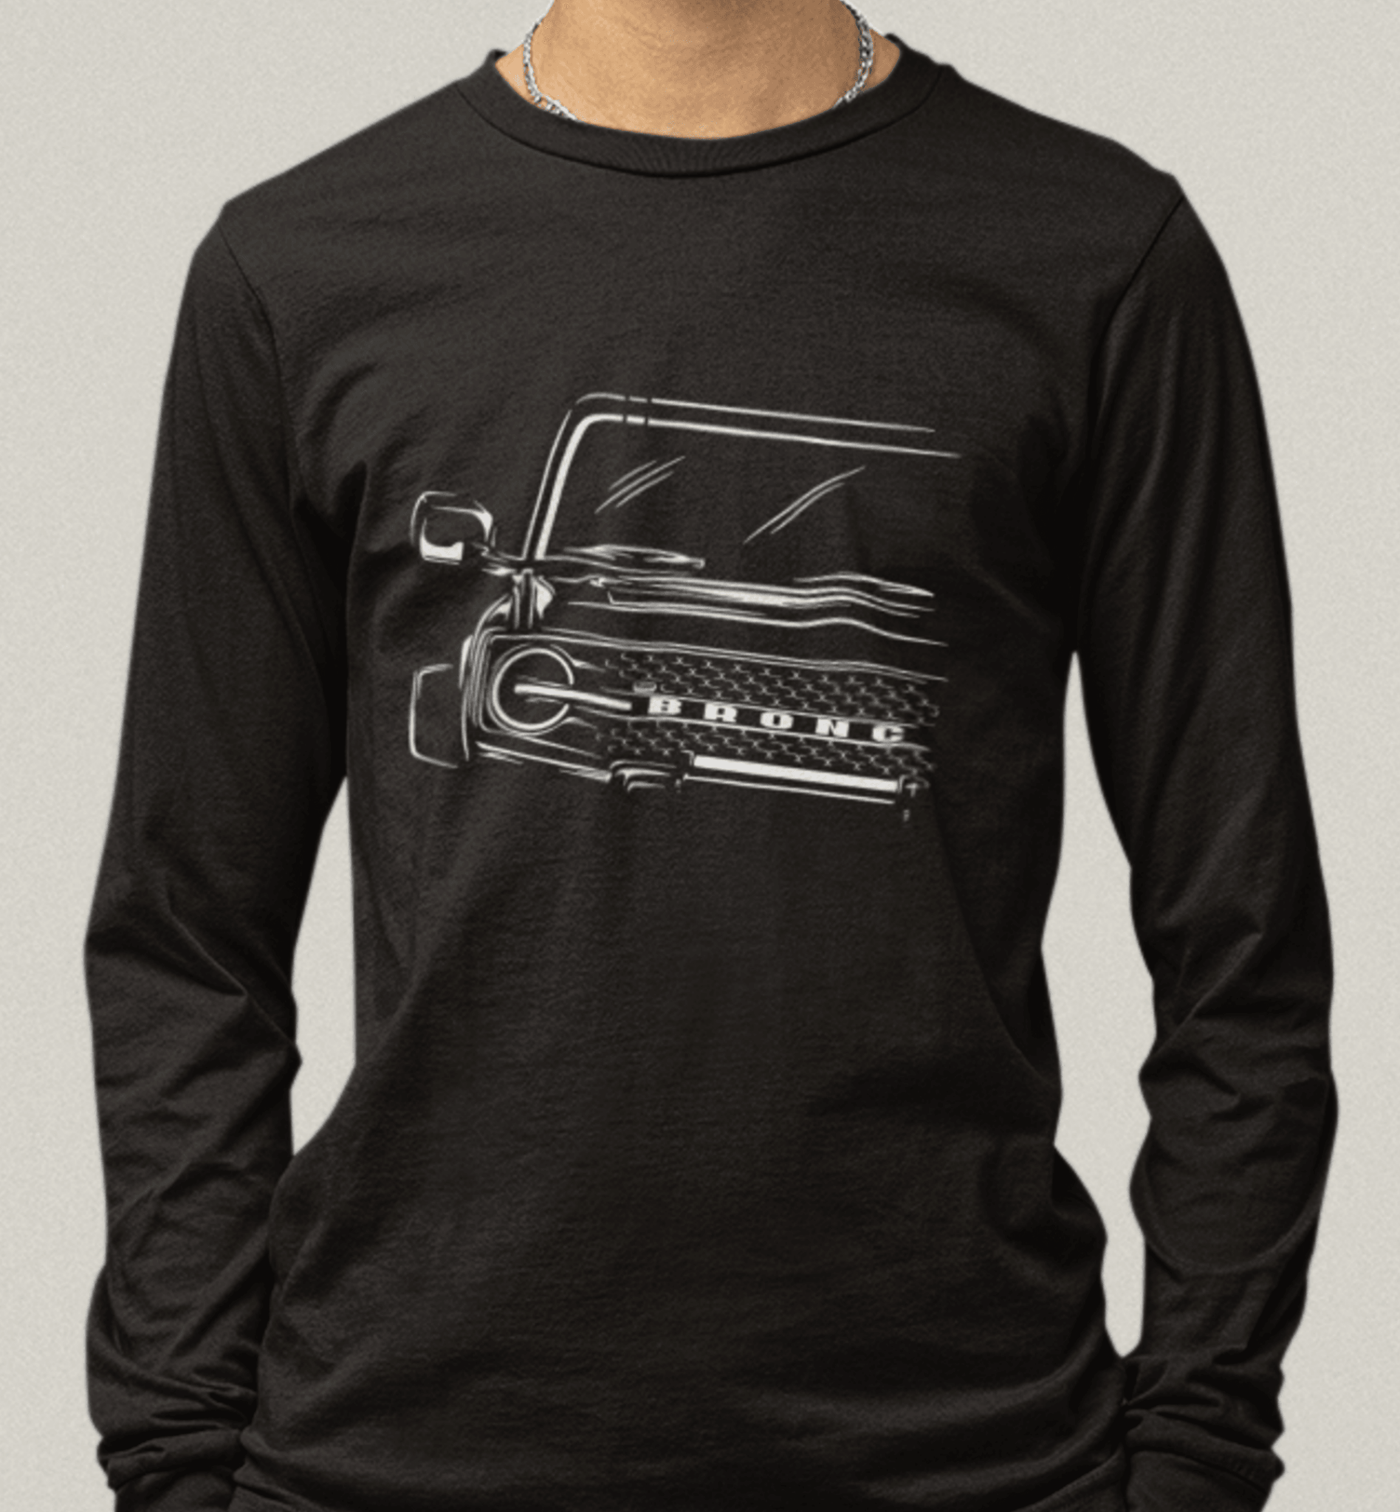 Ford Bronco Long-Sleeved Shirt - Goats Trail